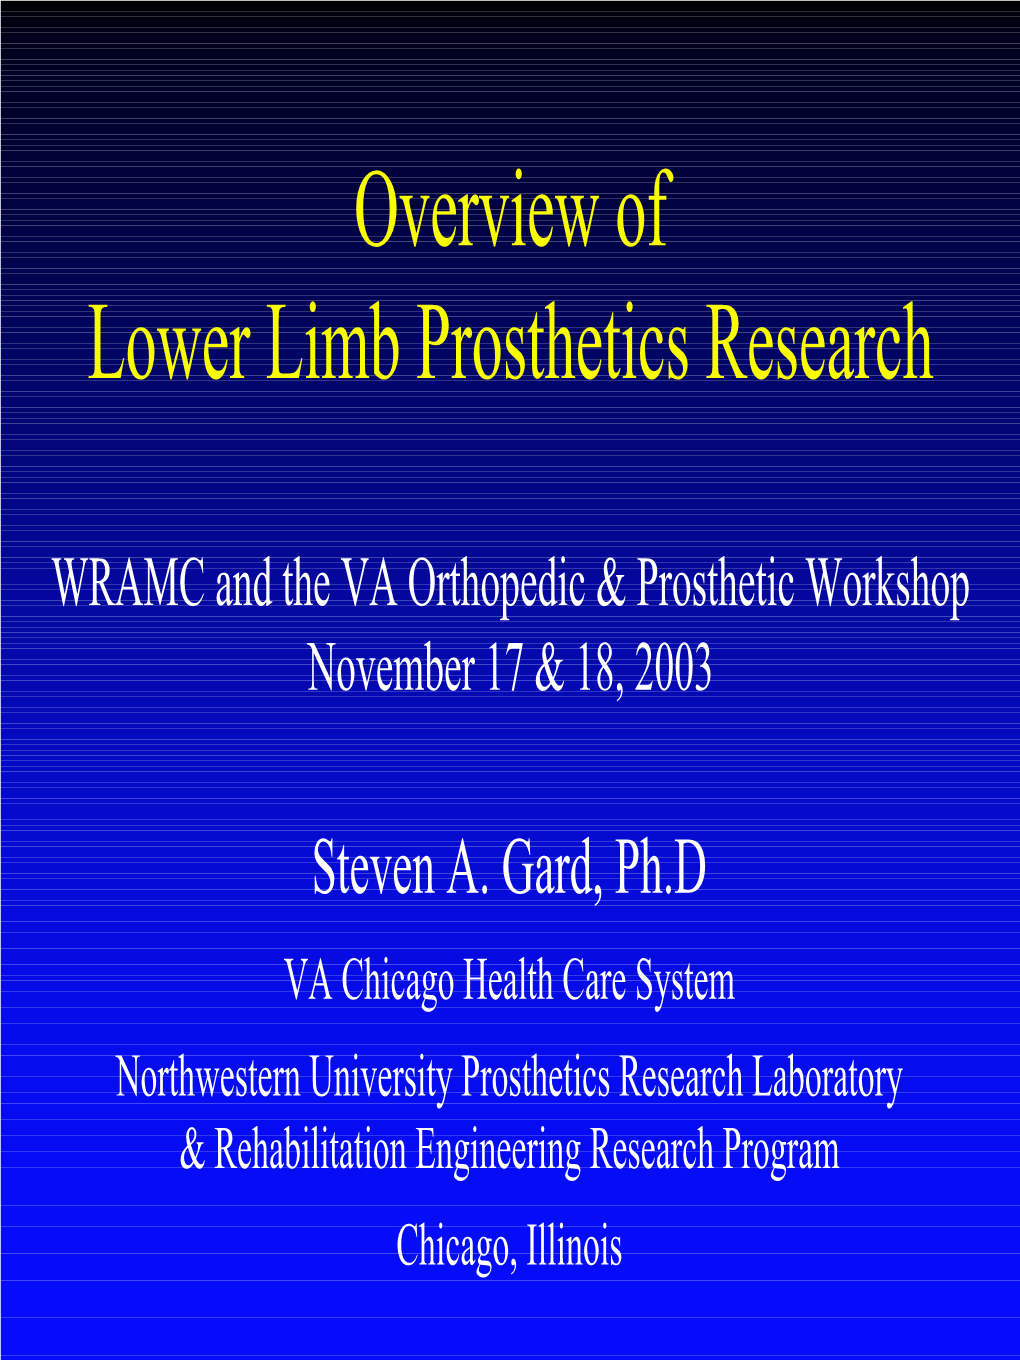 Overview of Lower Limb Prosthetics Research